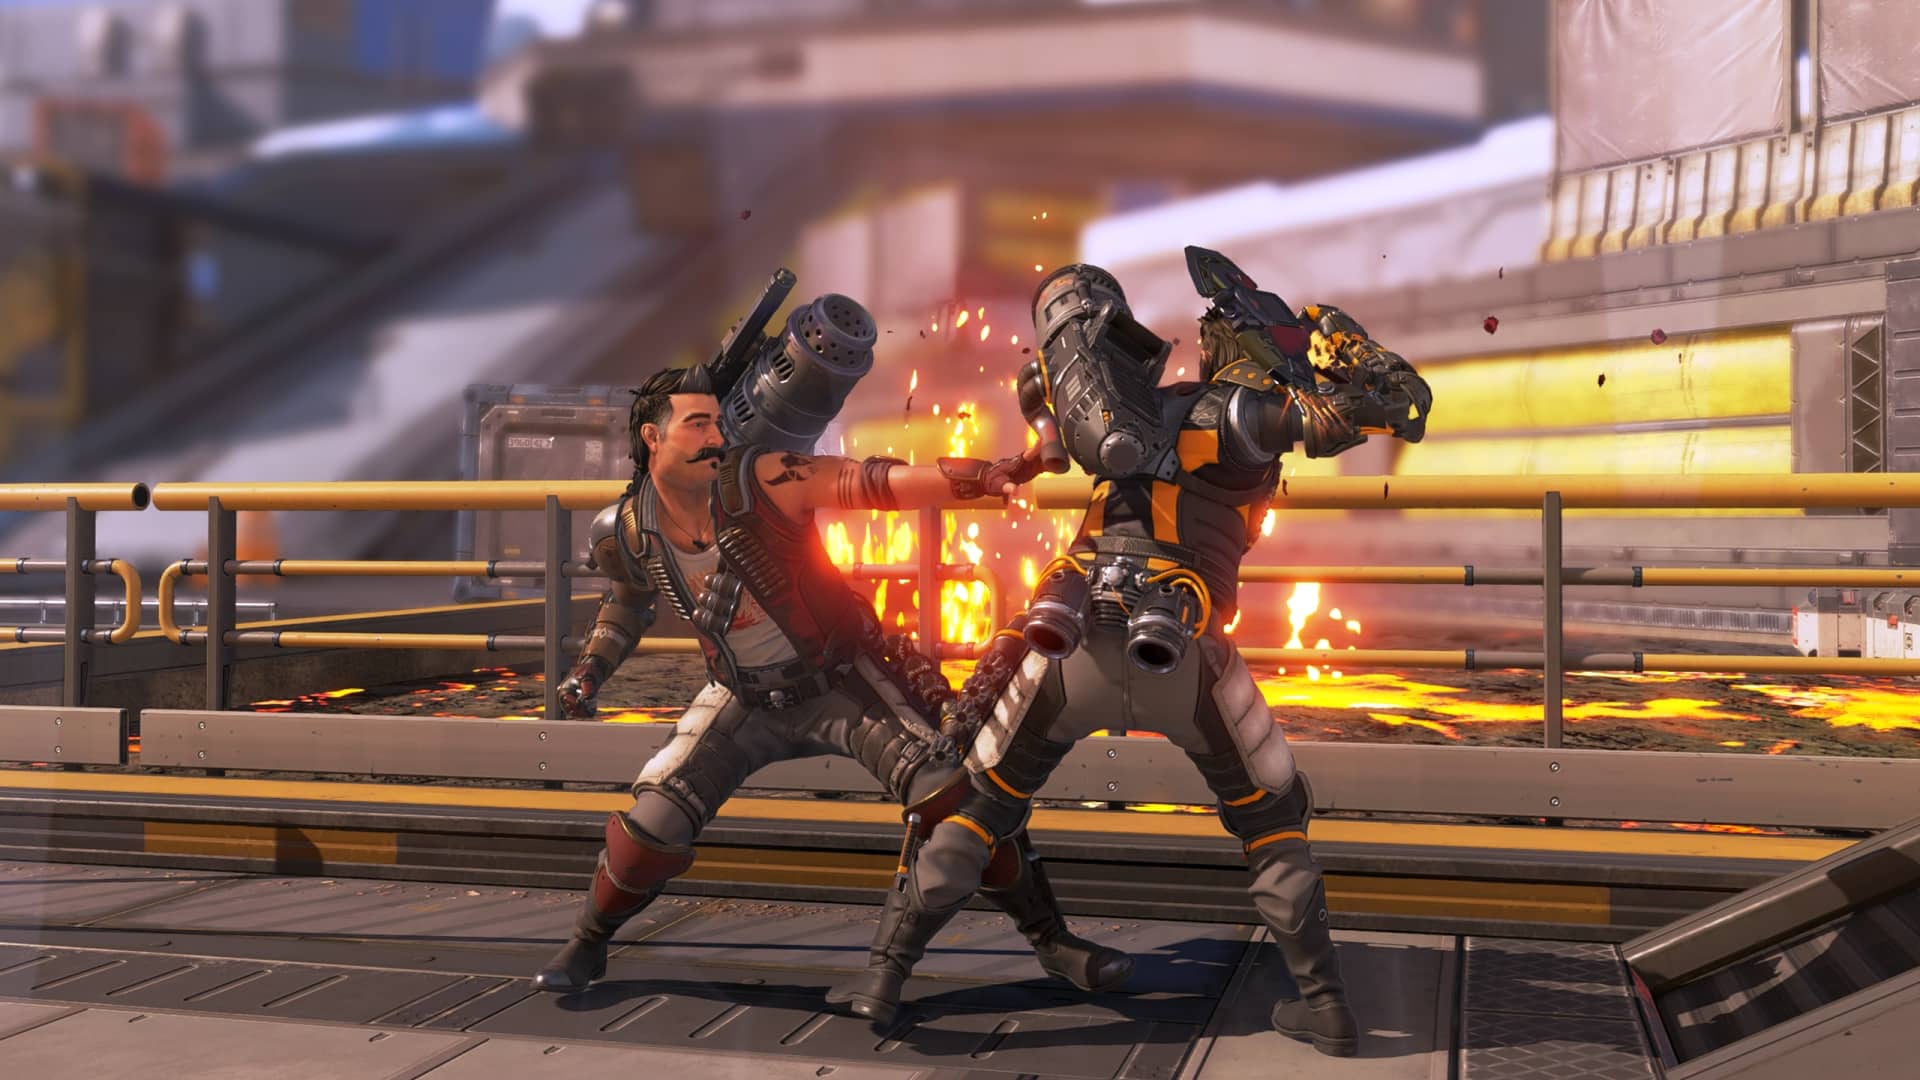 Apex Legends Update 1.000.061 Pushed Out for Breakout New Season This Feb. 13